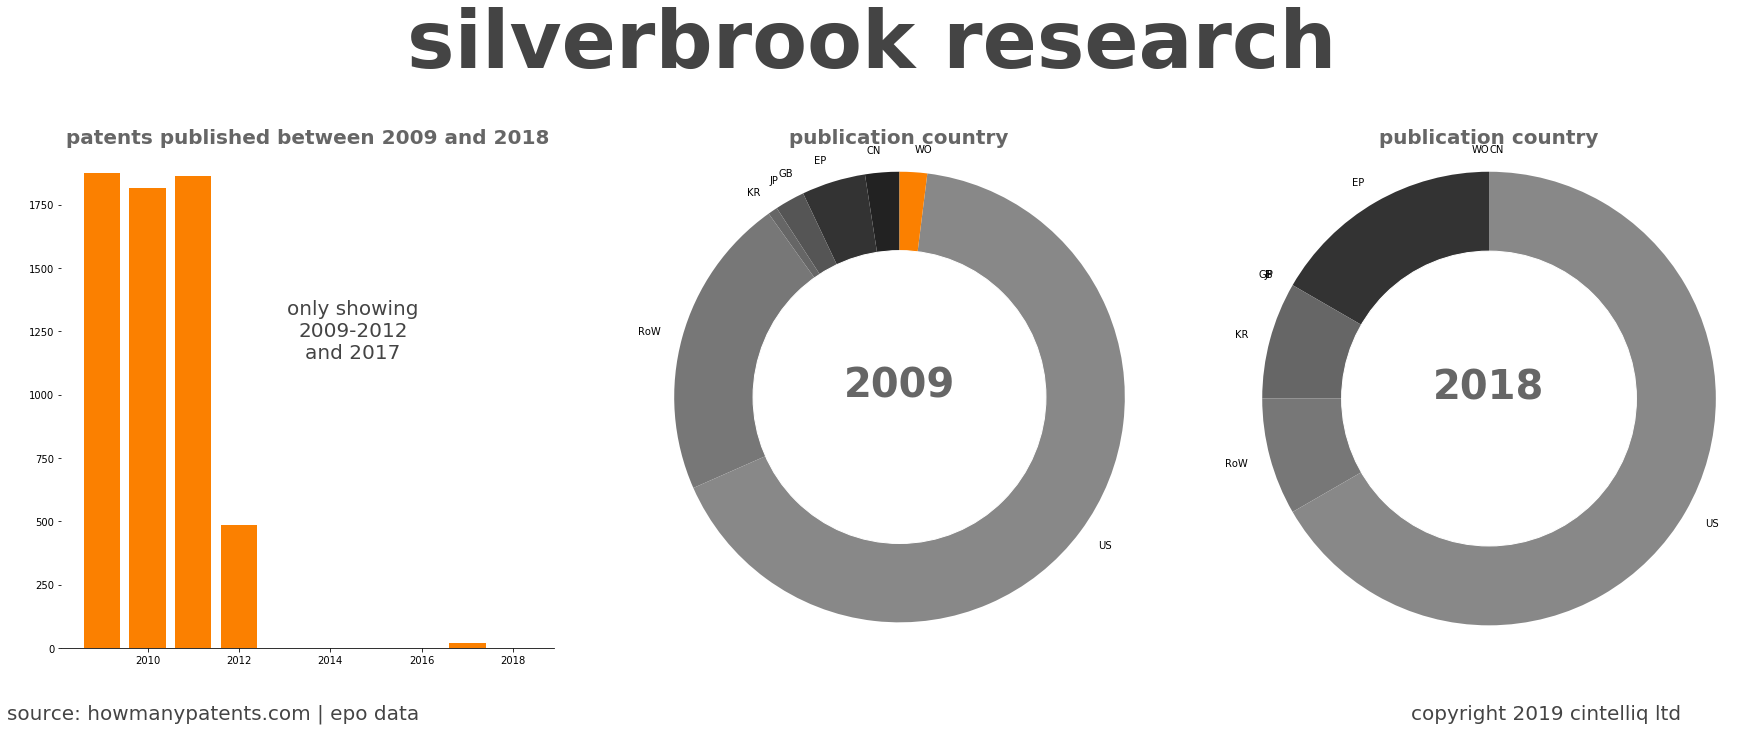 summary of patents for Silverbrook Research